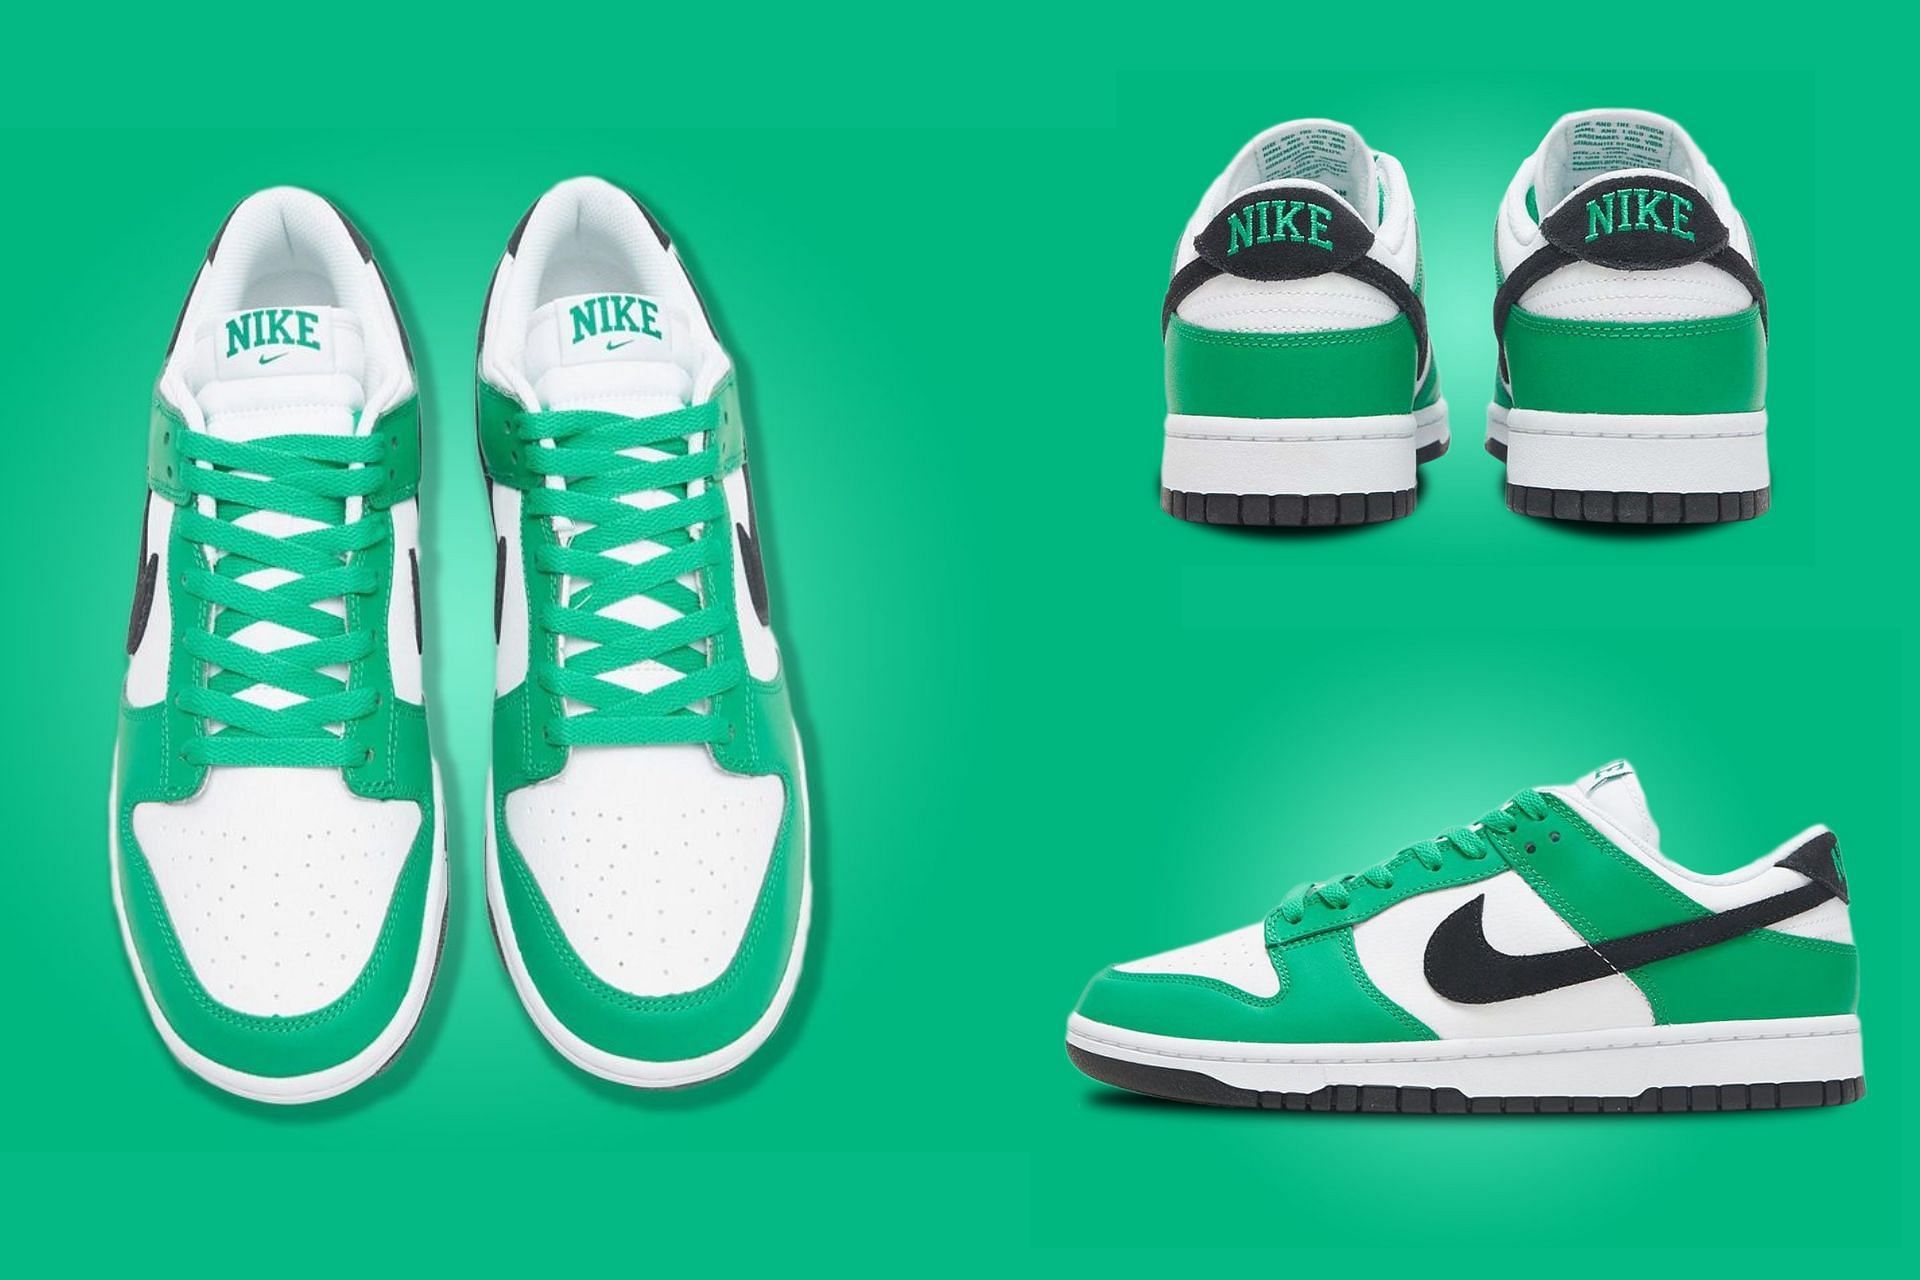 Celtics: Nike Dunk Low “Celtics” shoes: Where to buy, price, and